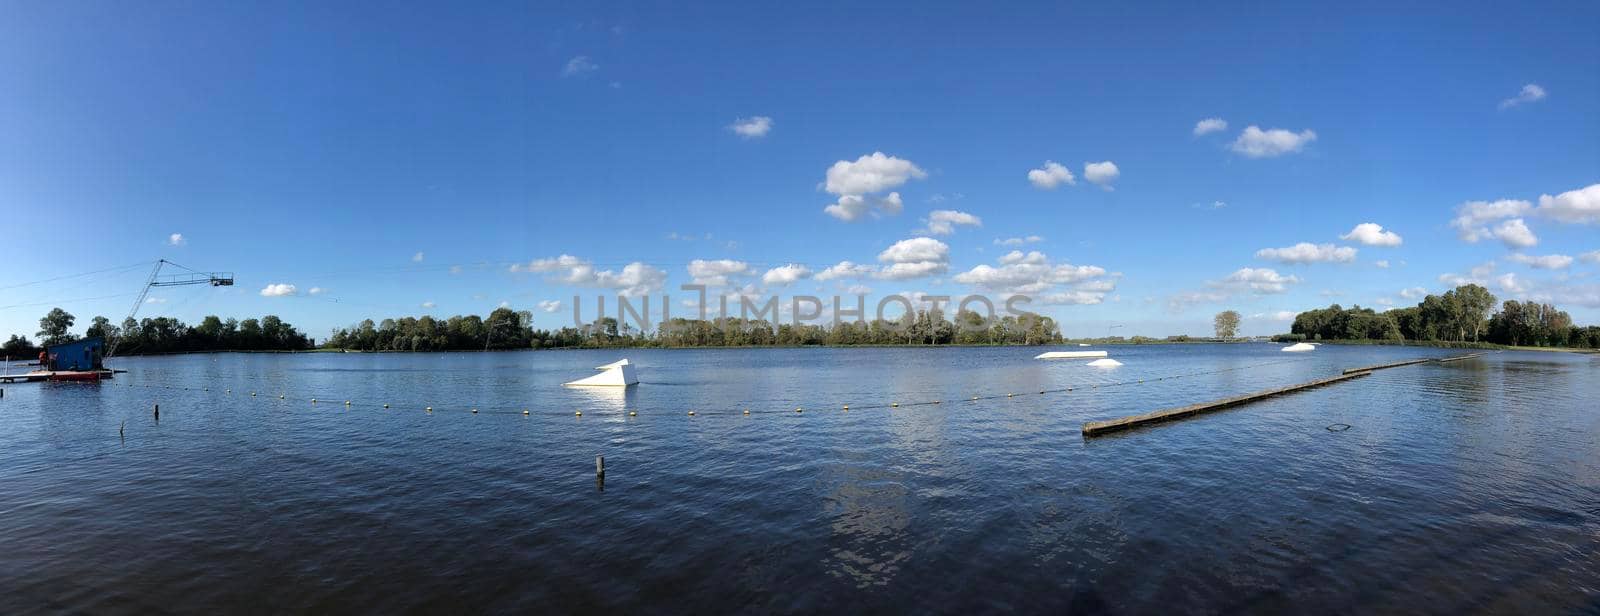 Panorama from the water ski course around Sneek, Friesland The Netherlands